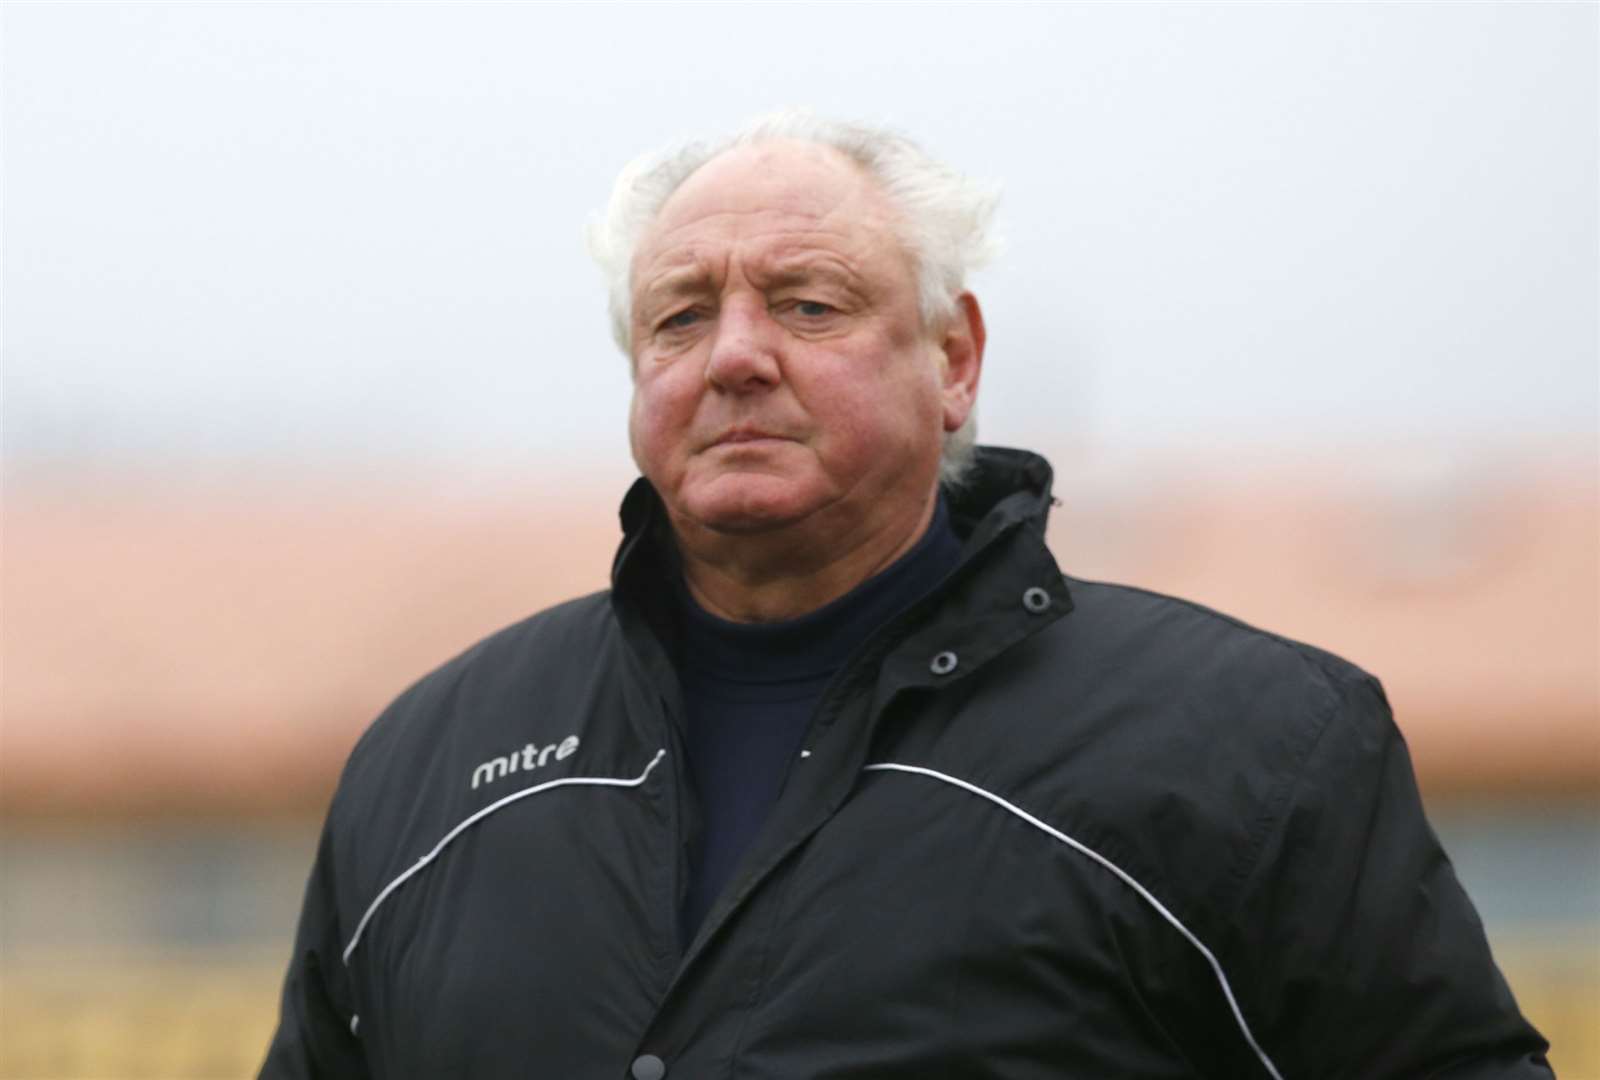 Folkestone Invicta manager Neil Cugley was chasing league and cup honours this season